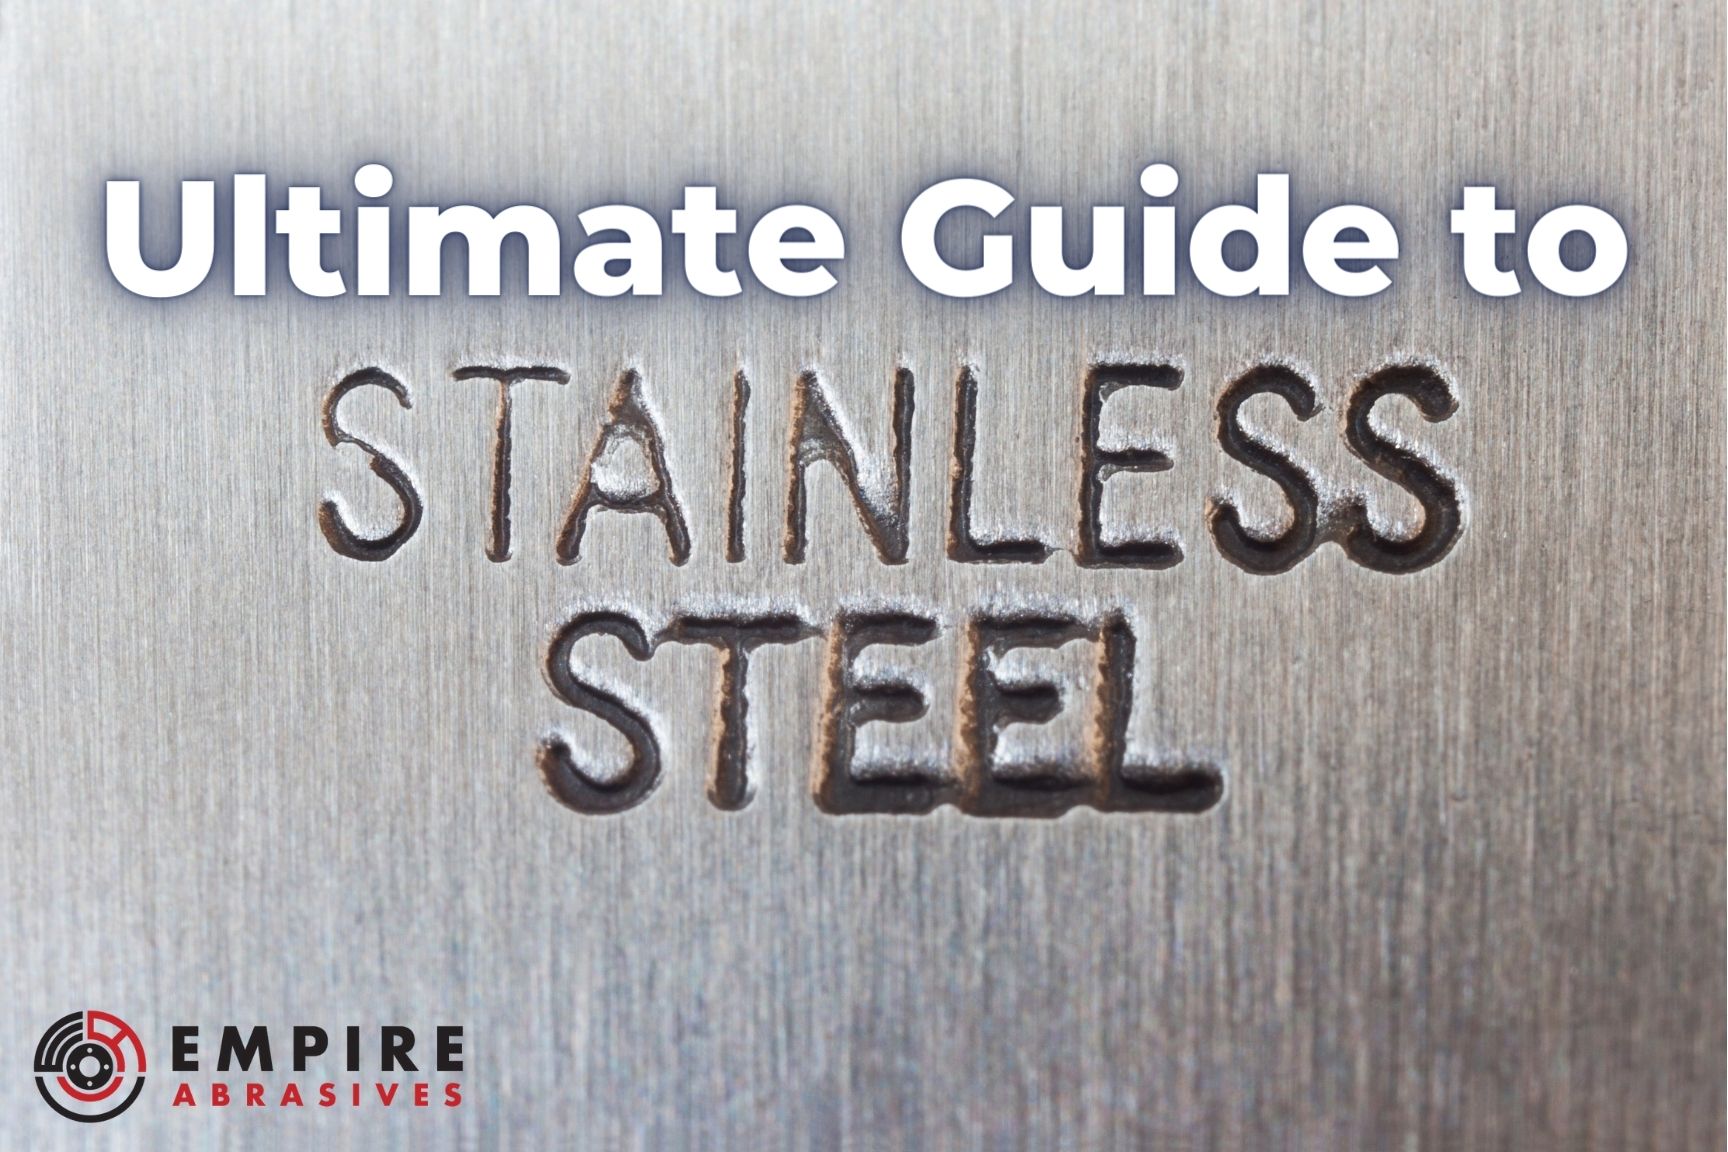 https://www.empireabrasives.com/product_images/uploaded_images/ultimate-guide-stainless-steel-fabrication-grinding-and-finishing-with-abrasives-1-.jpg